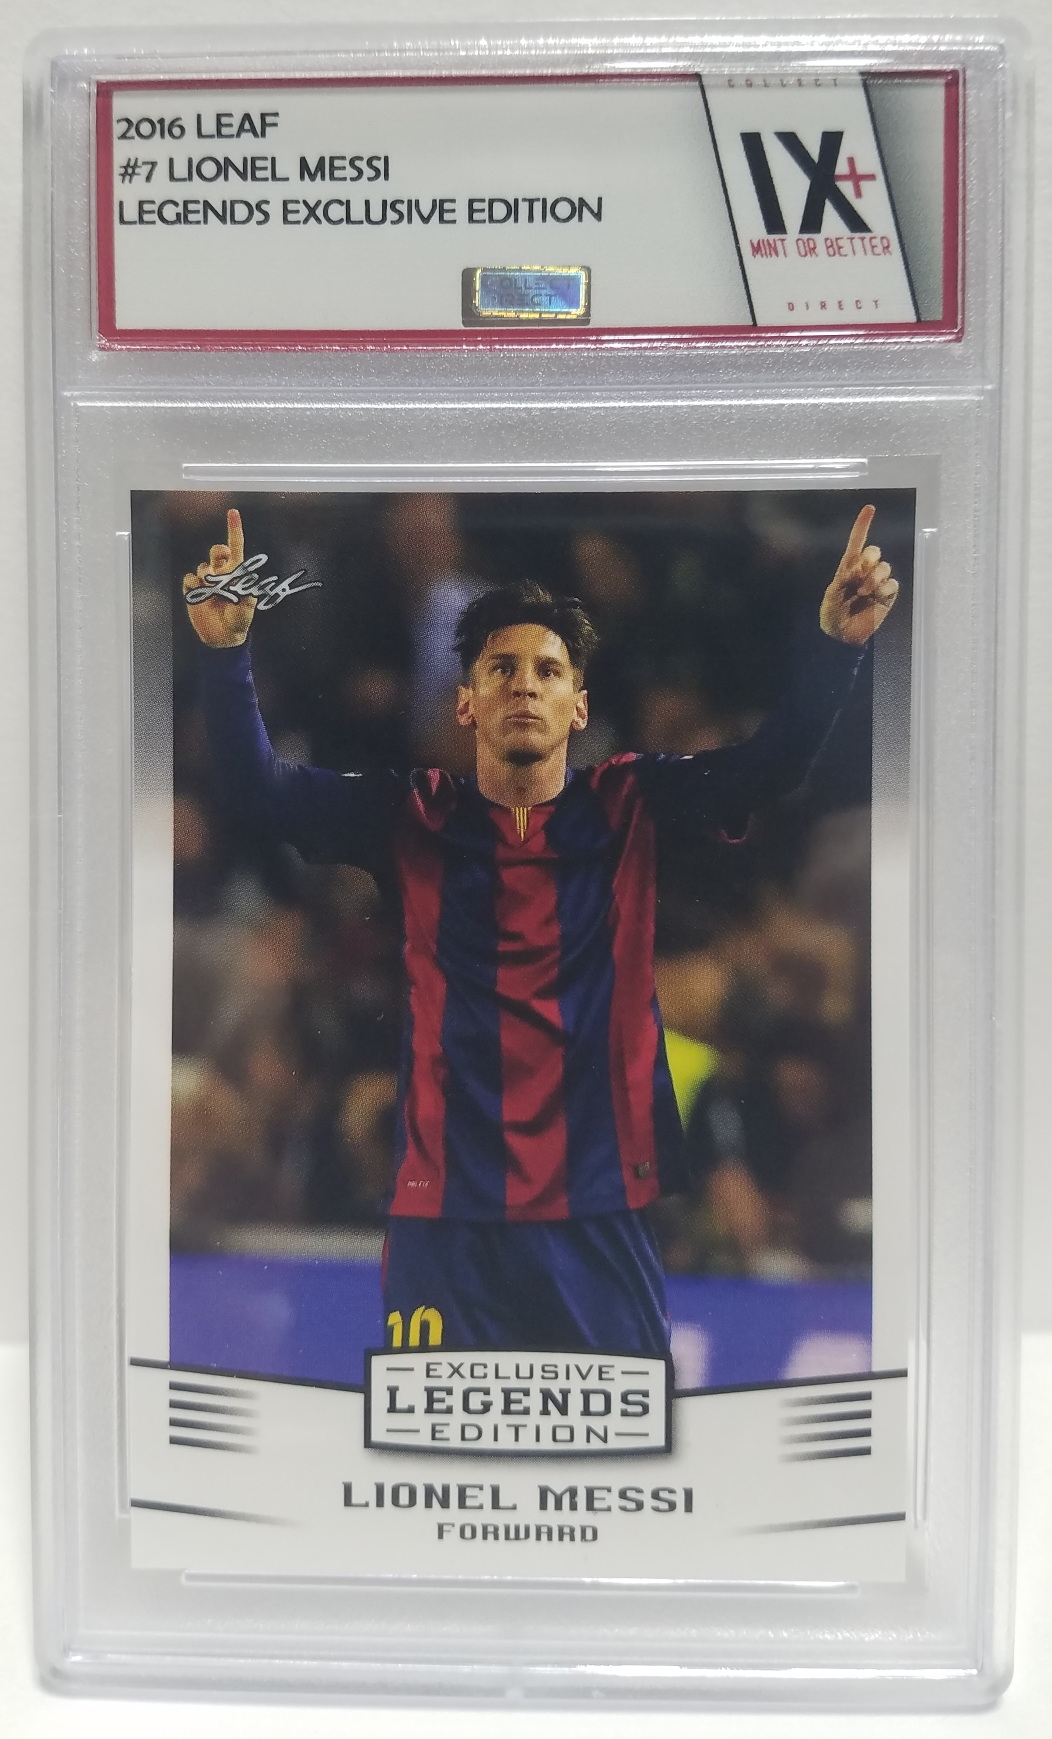 Lionel Messi 2016 Leaf Legends Exclusive Edition Collect Direct Graded Mint Or Better In Case SOCCER GOAT! 